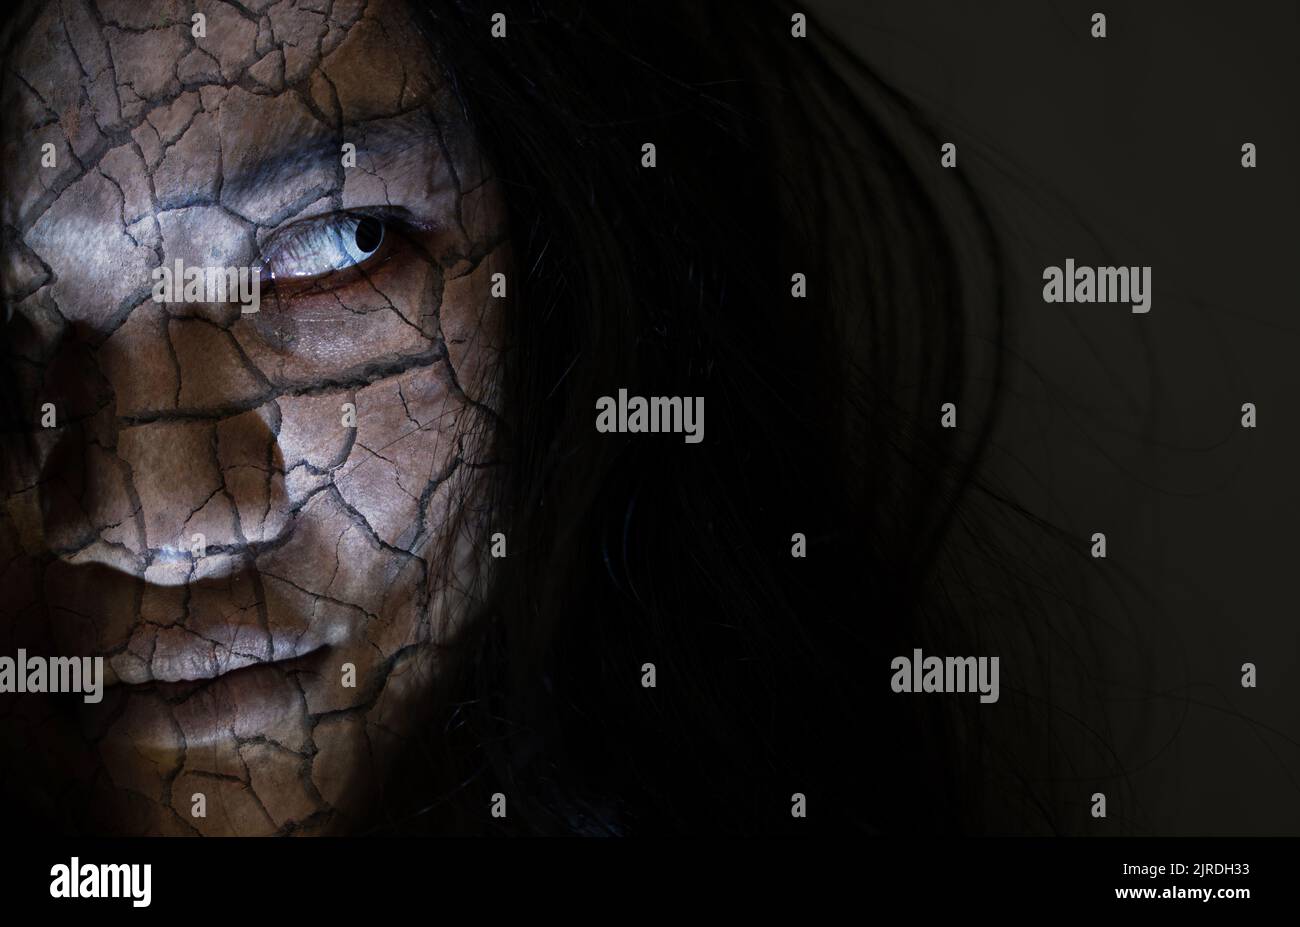 Scary ghost woman. Close up face of Asian woman ghost or zombie horror creepy scary have hair covering the face her eye at abandoned dark tone, female Stock Photo